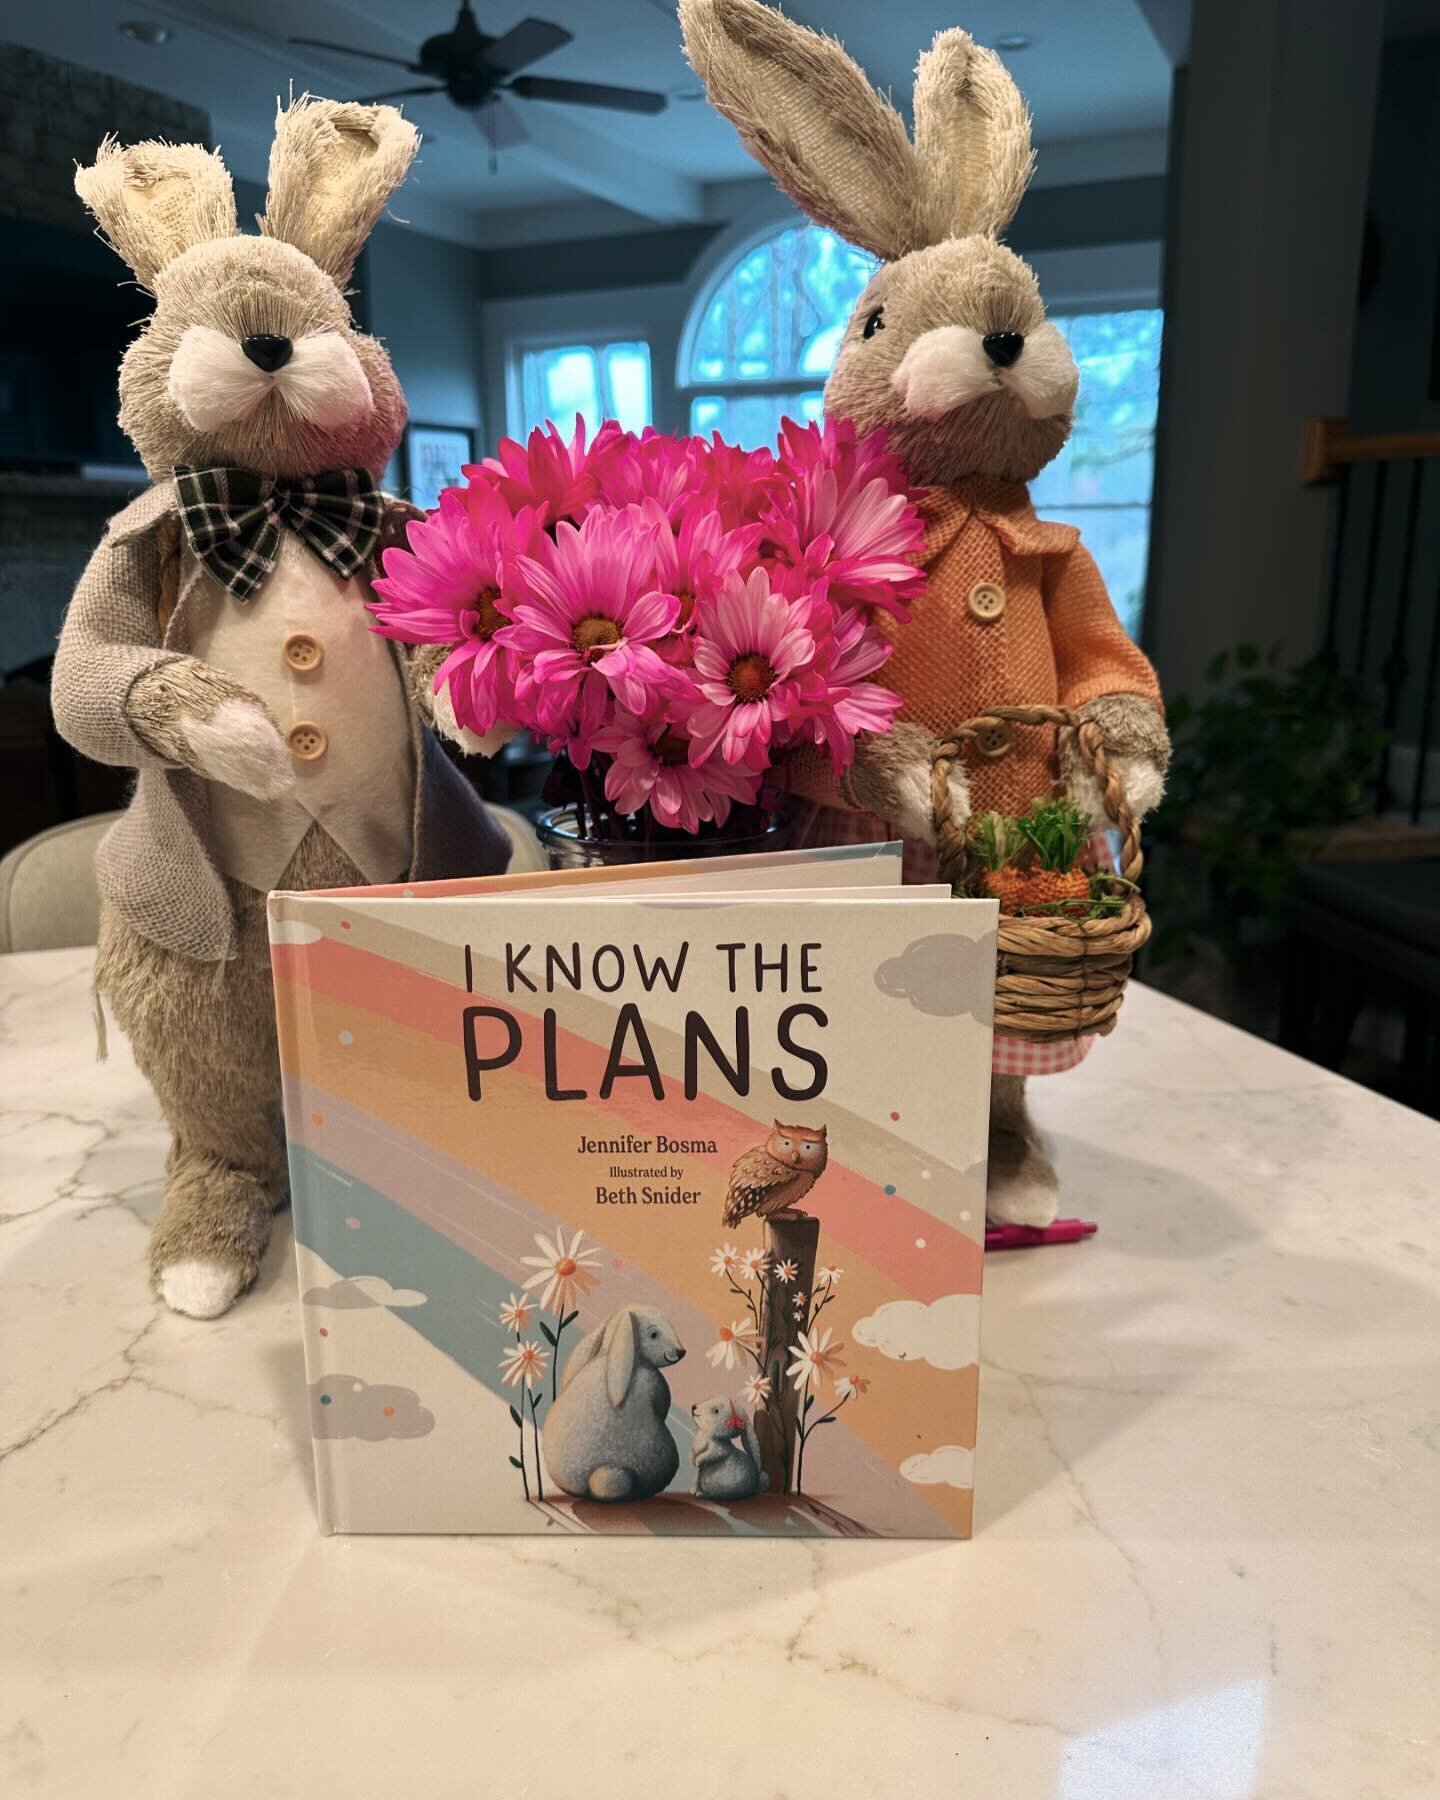 There is a lot of content in this picture! 🦉🐇🌼Thanks to my illustrator for the cover drawn two years ago! Order today in time for Easter. Link in my bio.✝️ #iknowtheplans #easter #faith #granddaughters #jeremiah #blessed